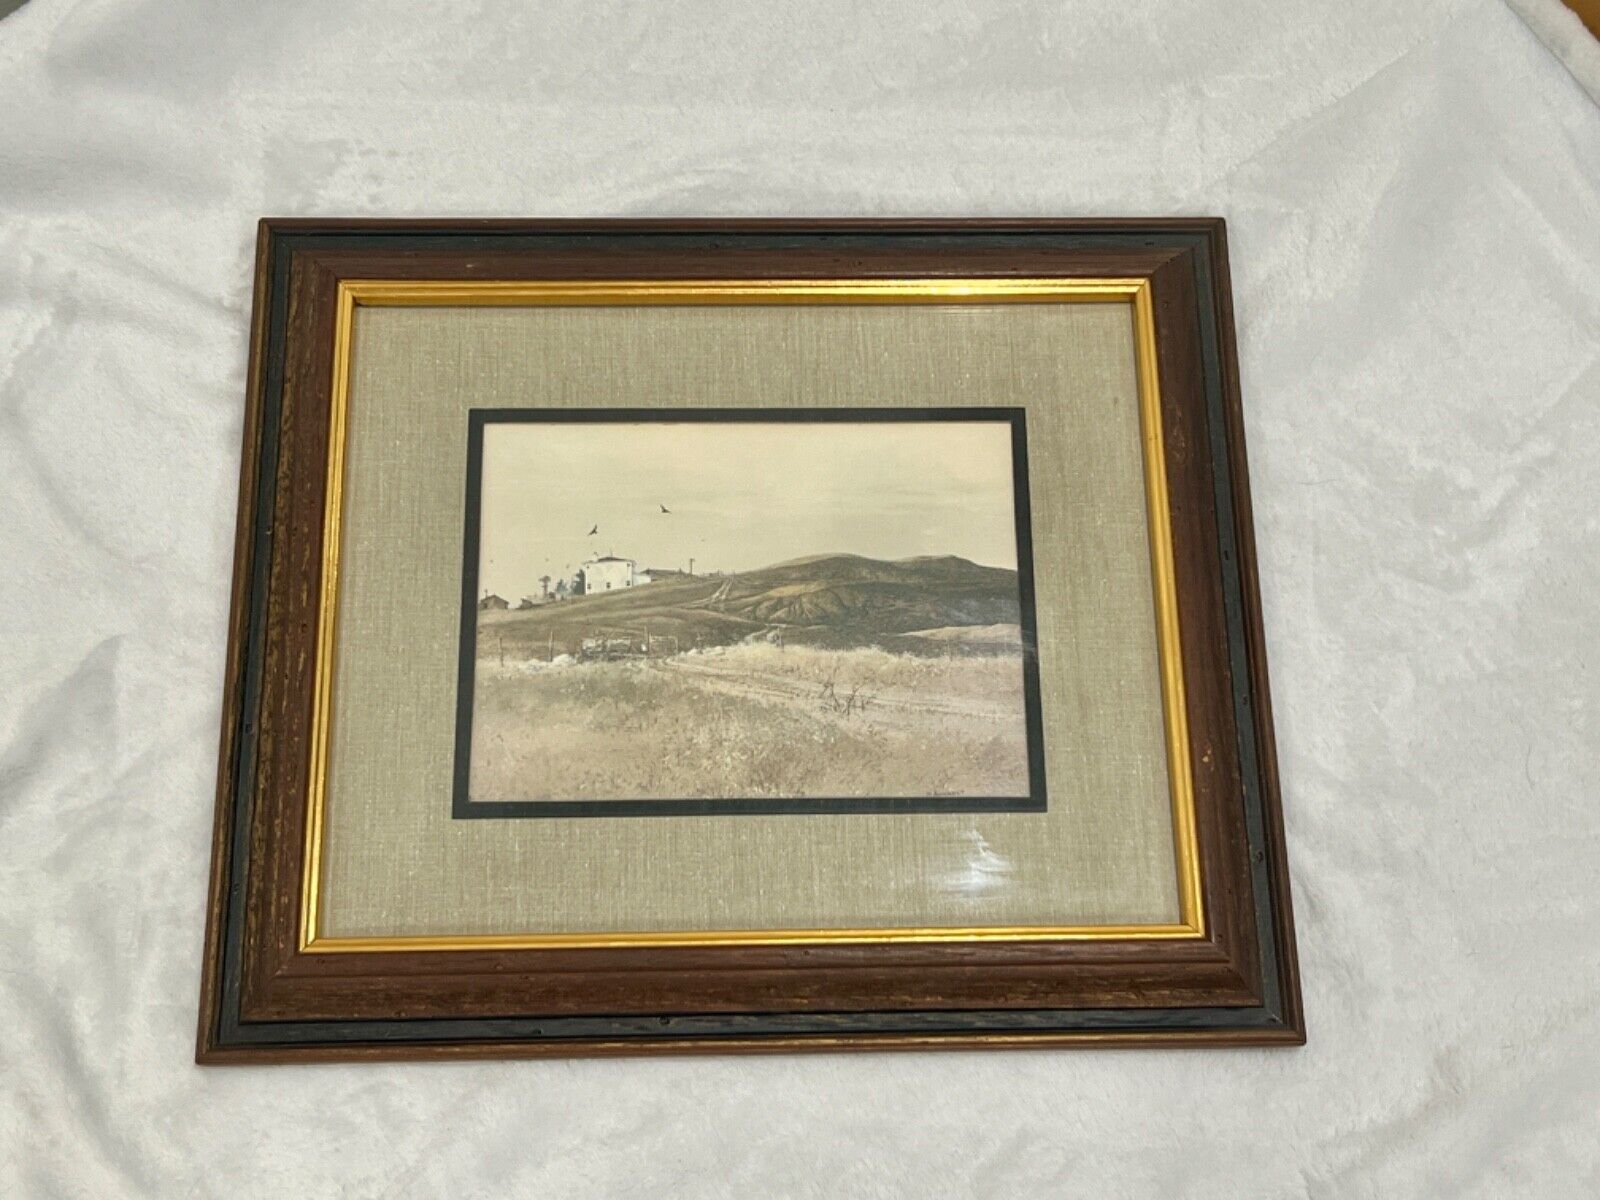 Turner Wall Accessory Vintage MCM Landscape Print Rural American Collection